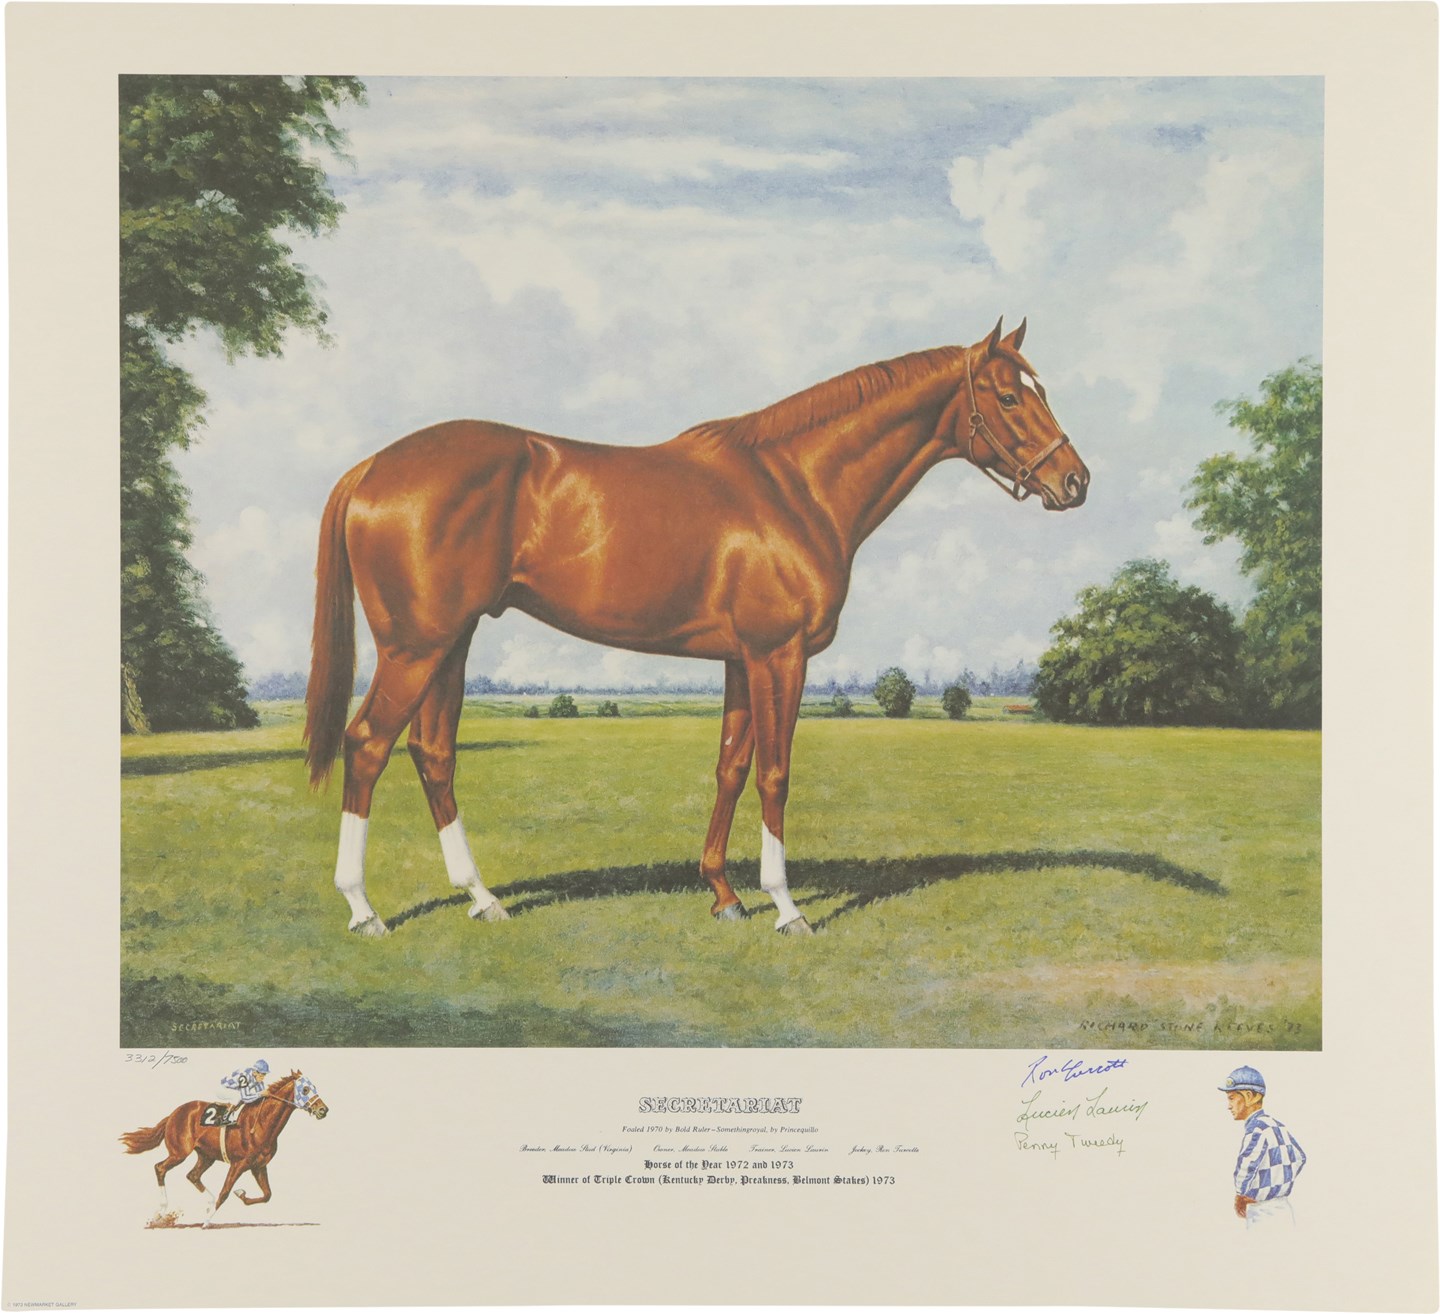 Secretariat Limited-Edition Lithograph by Richard Stone Reeves Signed by the Owner, Jockey and Trainer